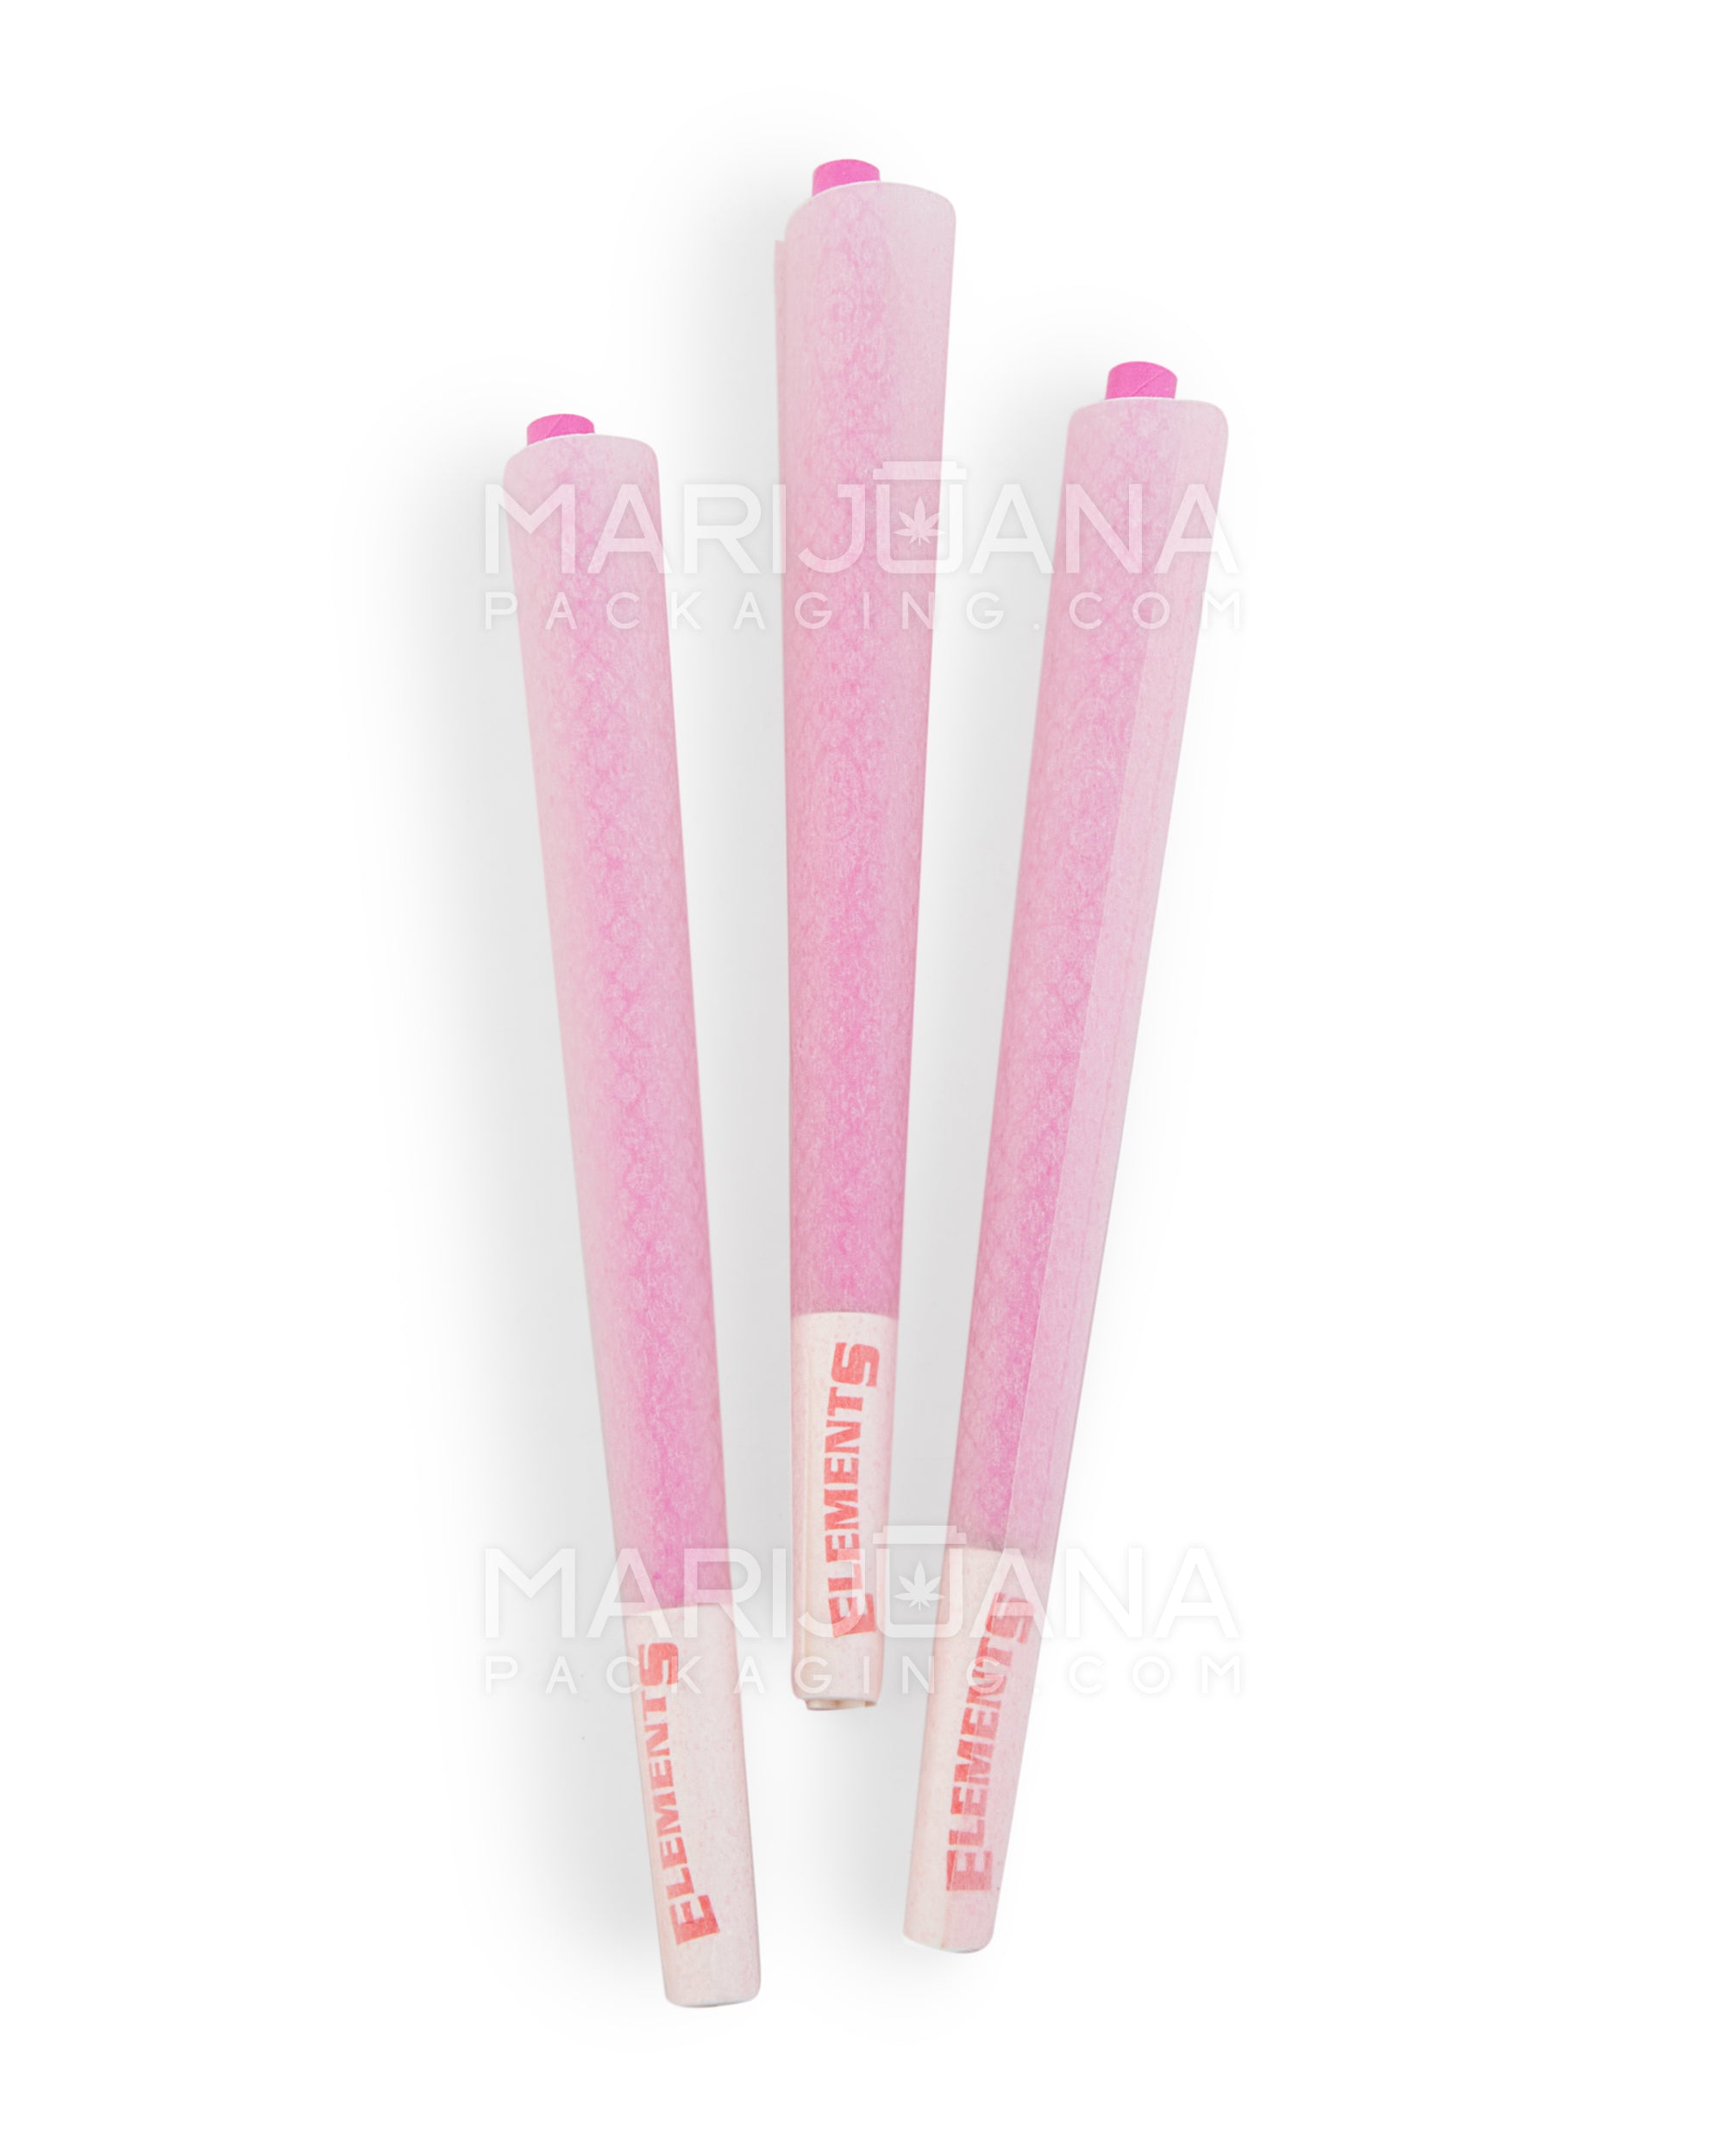 ELEMENTS | 'Retail Display' King Size Ultra Thin Pre-Rolled Cones | 109mm - Pink Rice Paper - 32 Count - 3